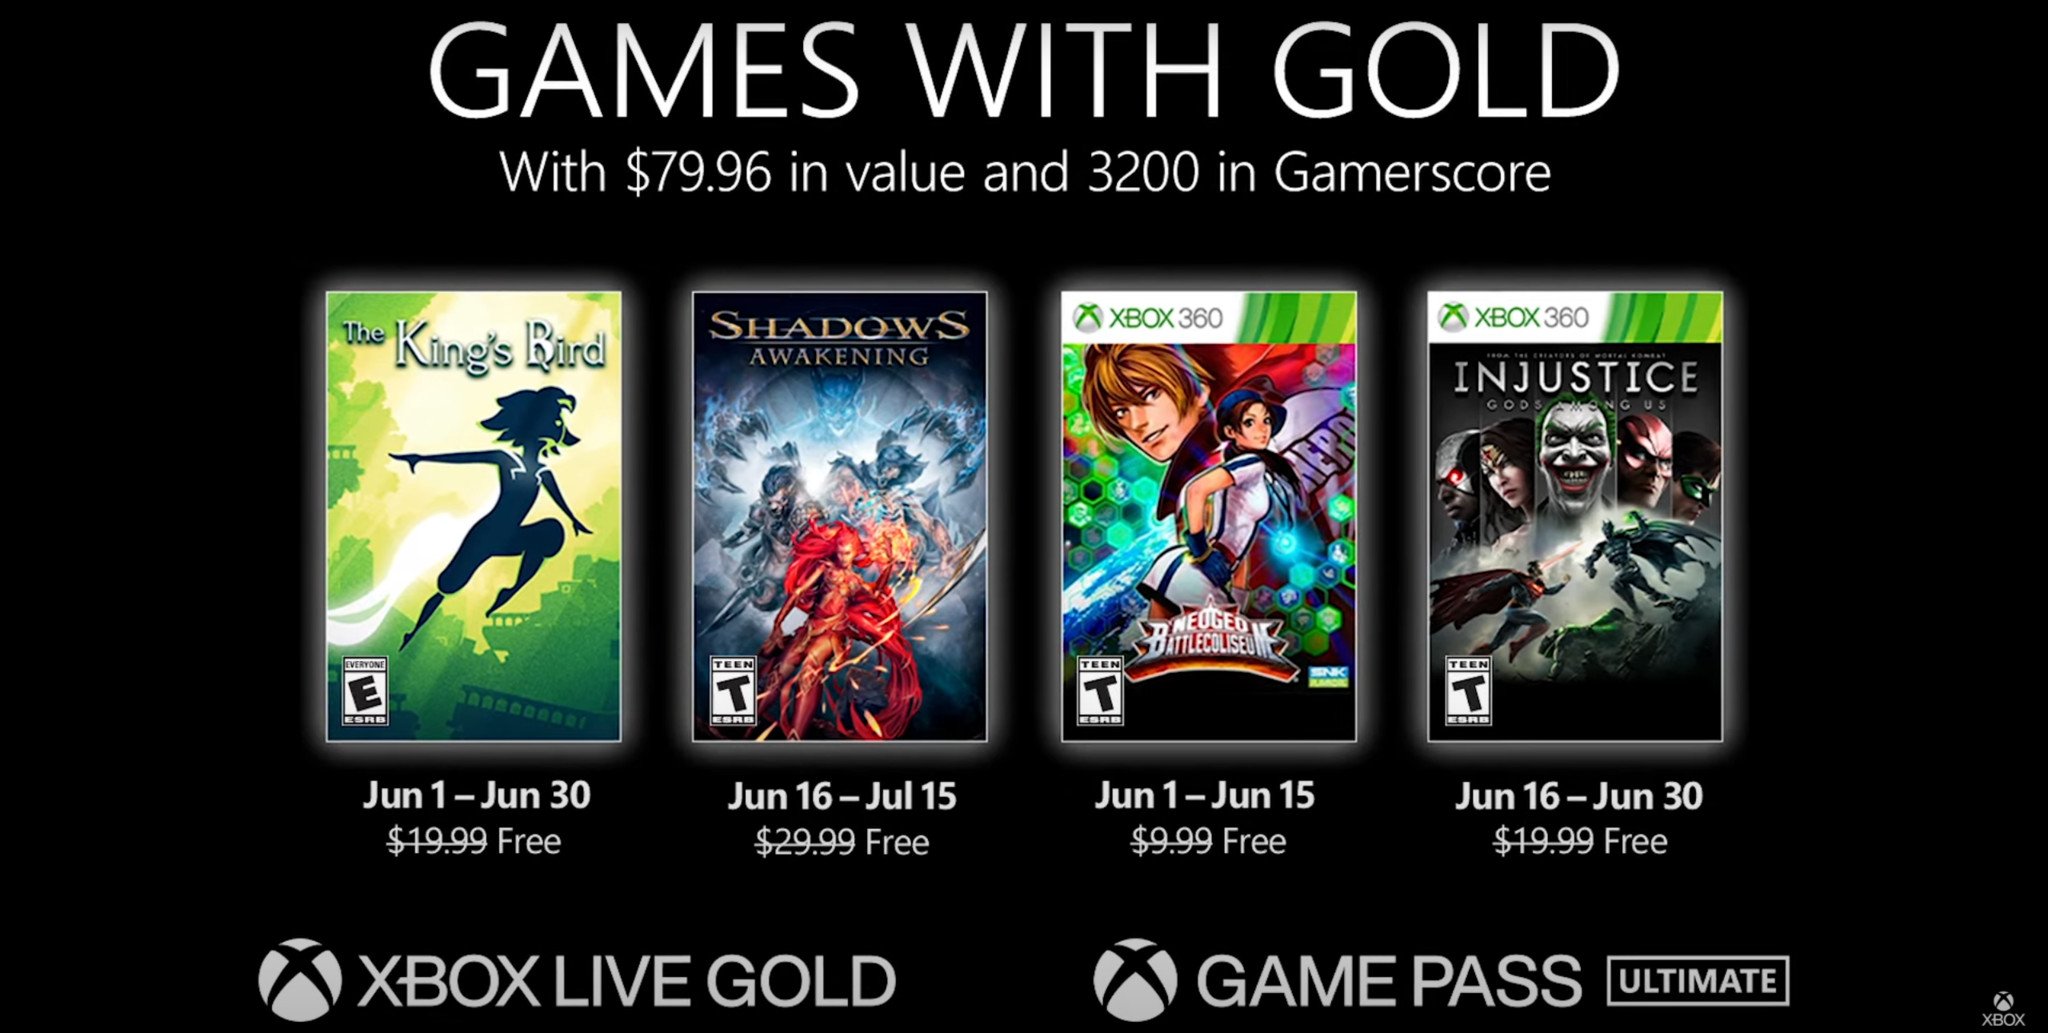 How to Get Free Games on Xbox One With Xbox Live and Game Pass